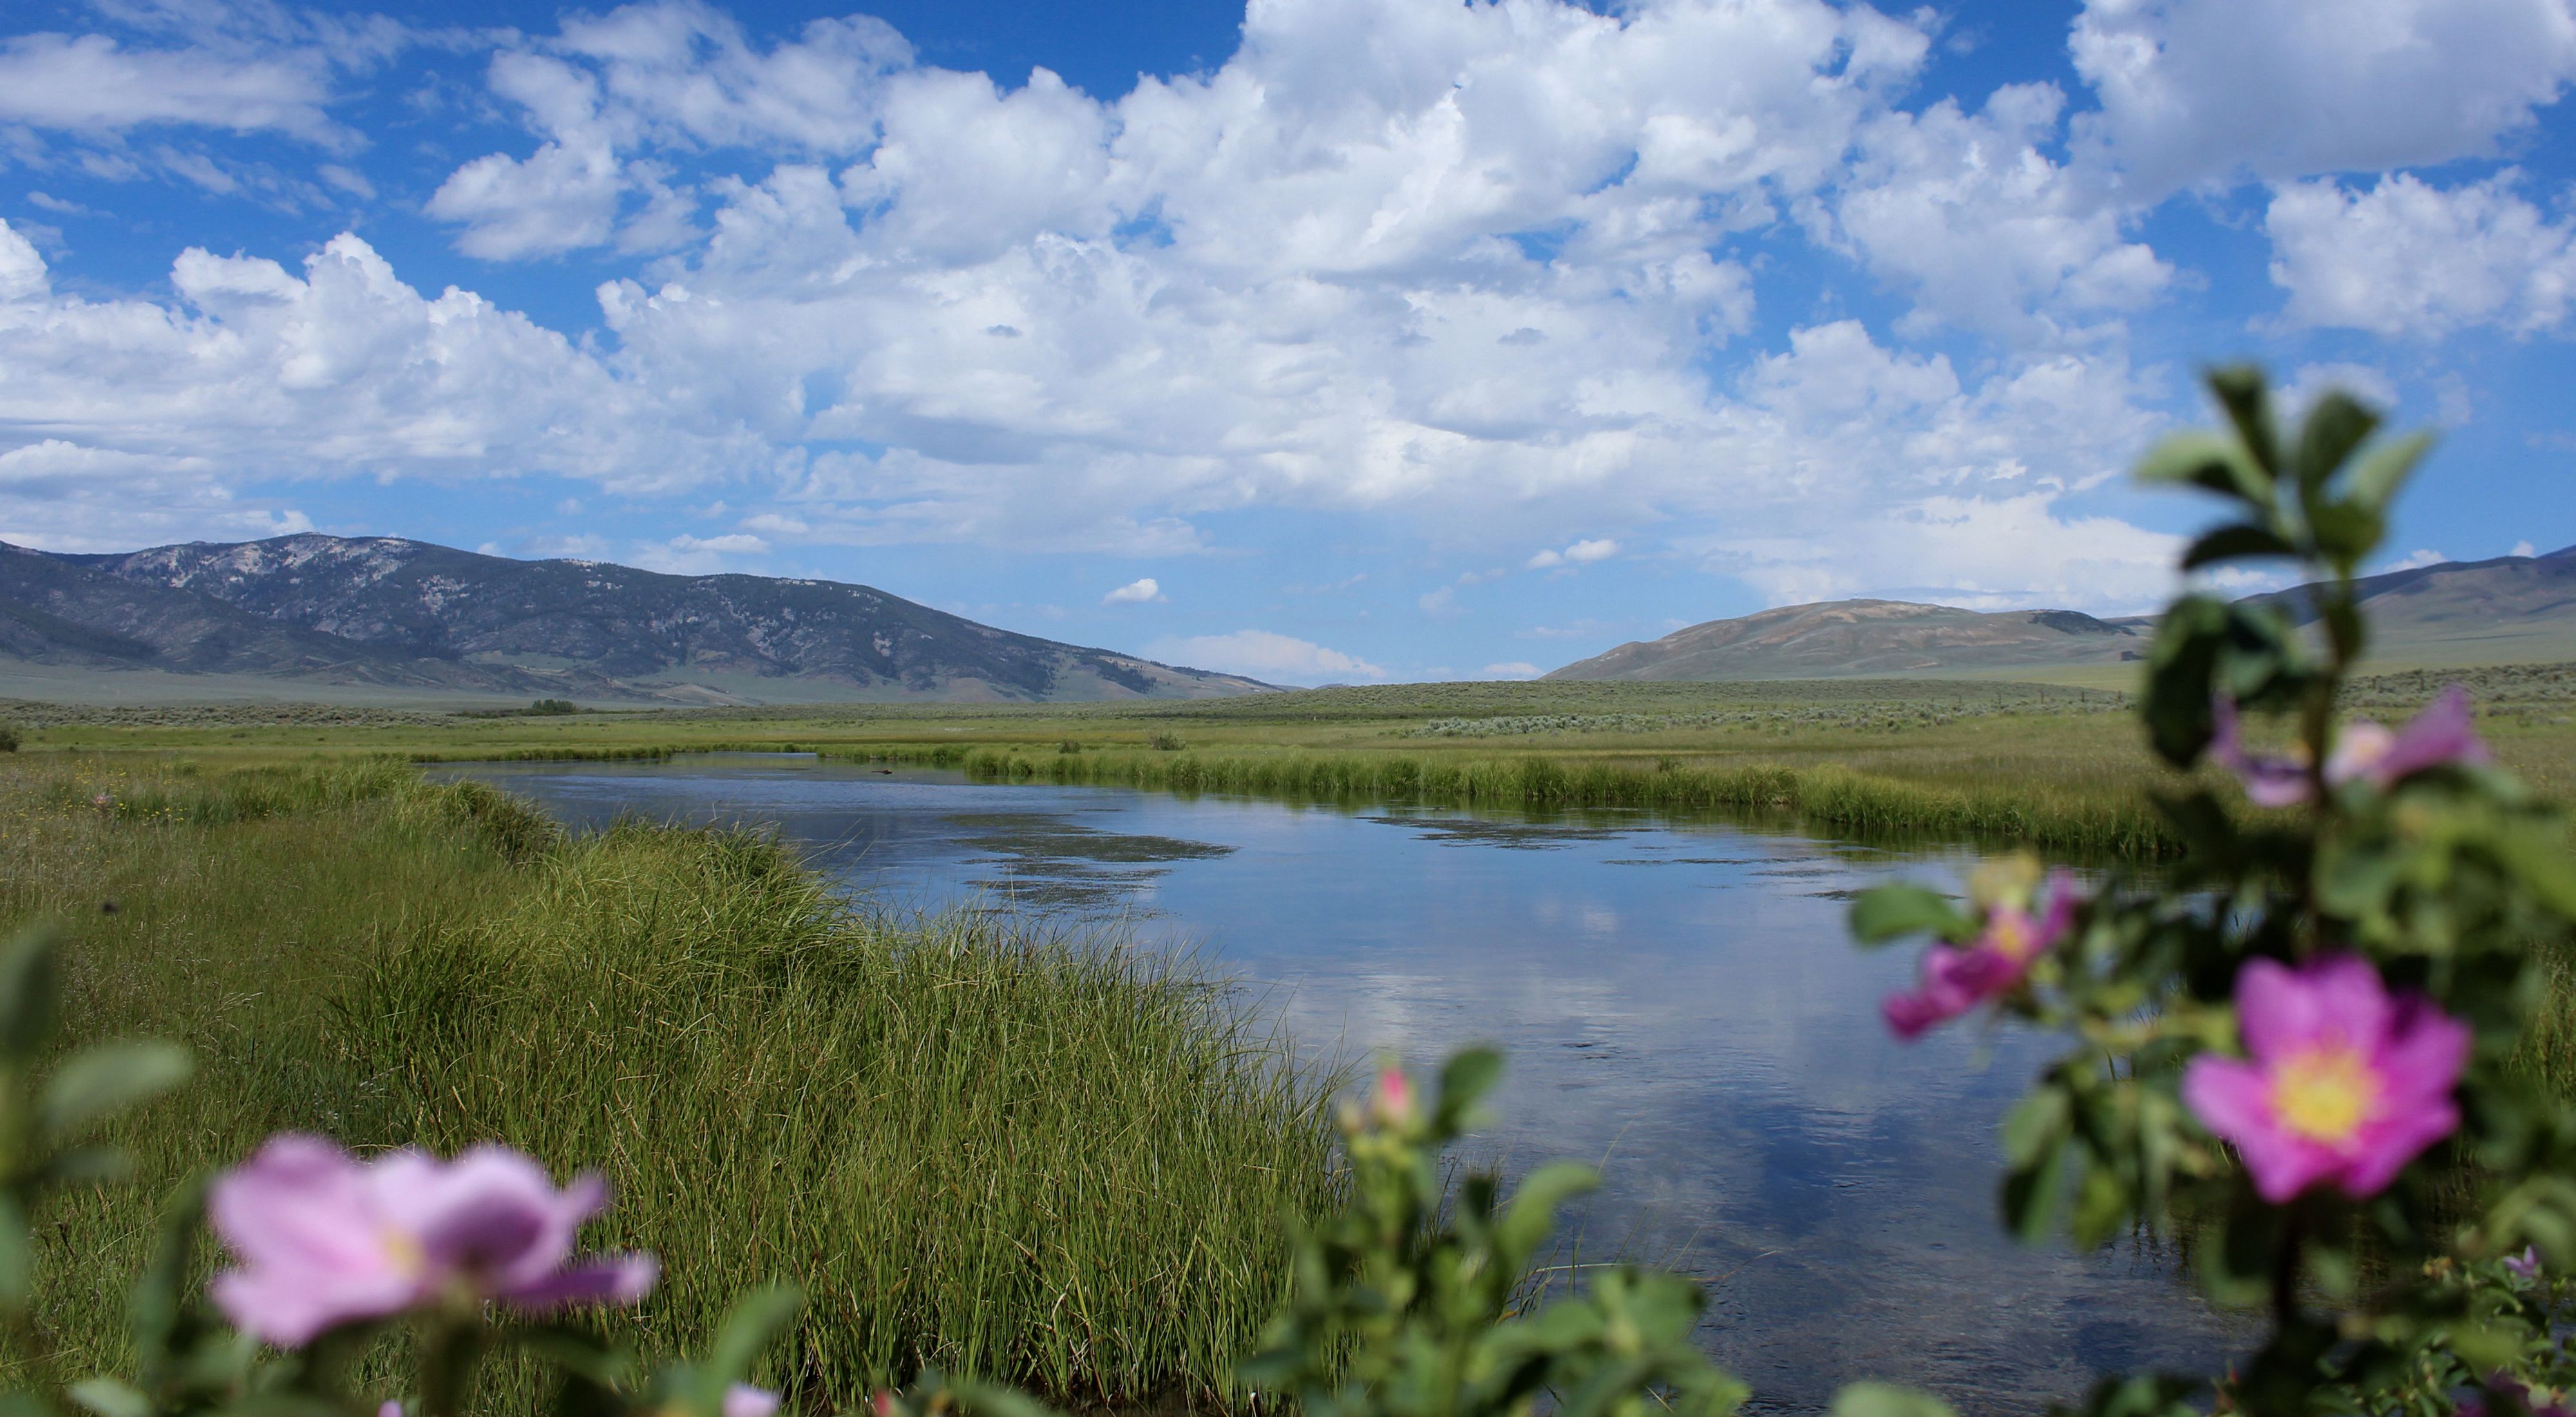 A view of a creek with flowers in the foreground and a cloud-filled sky.